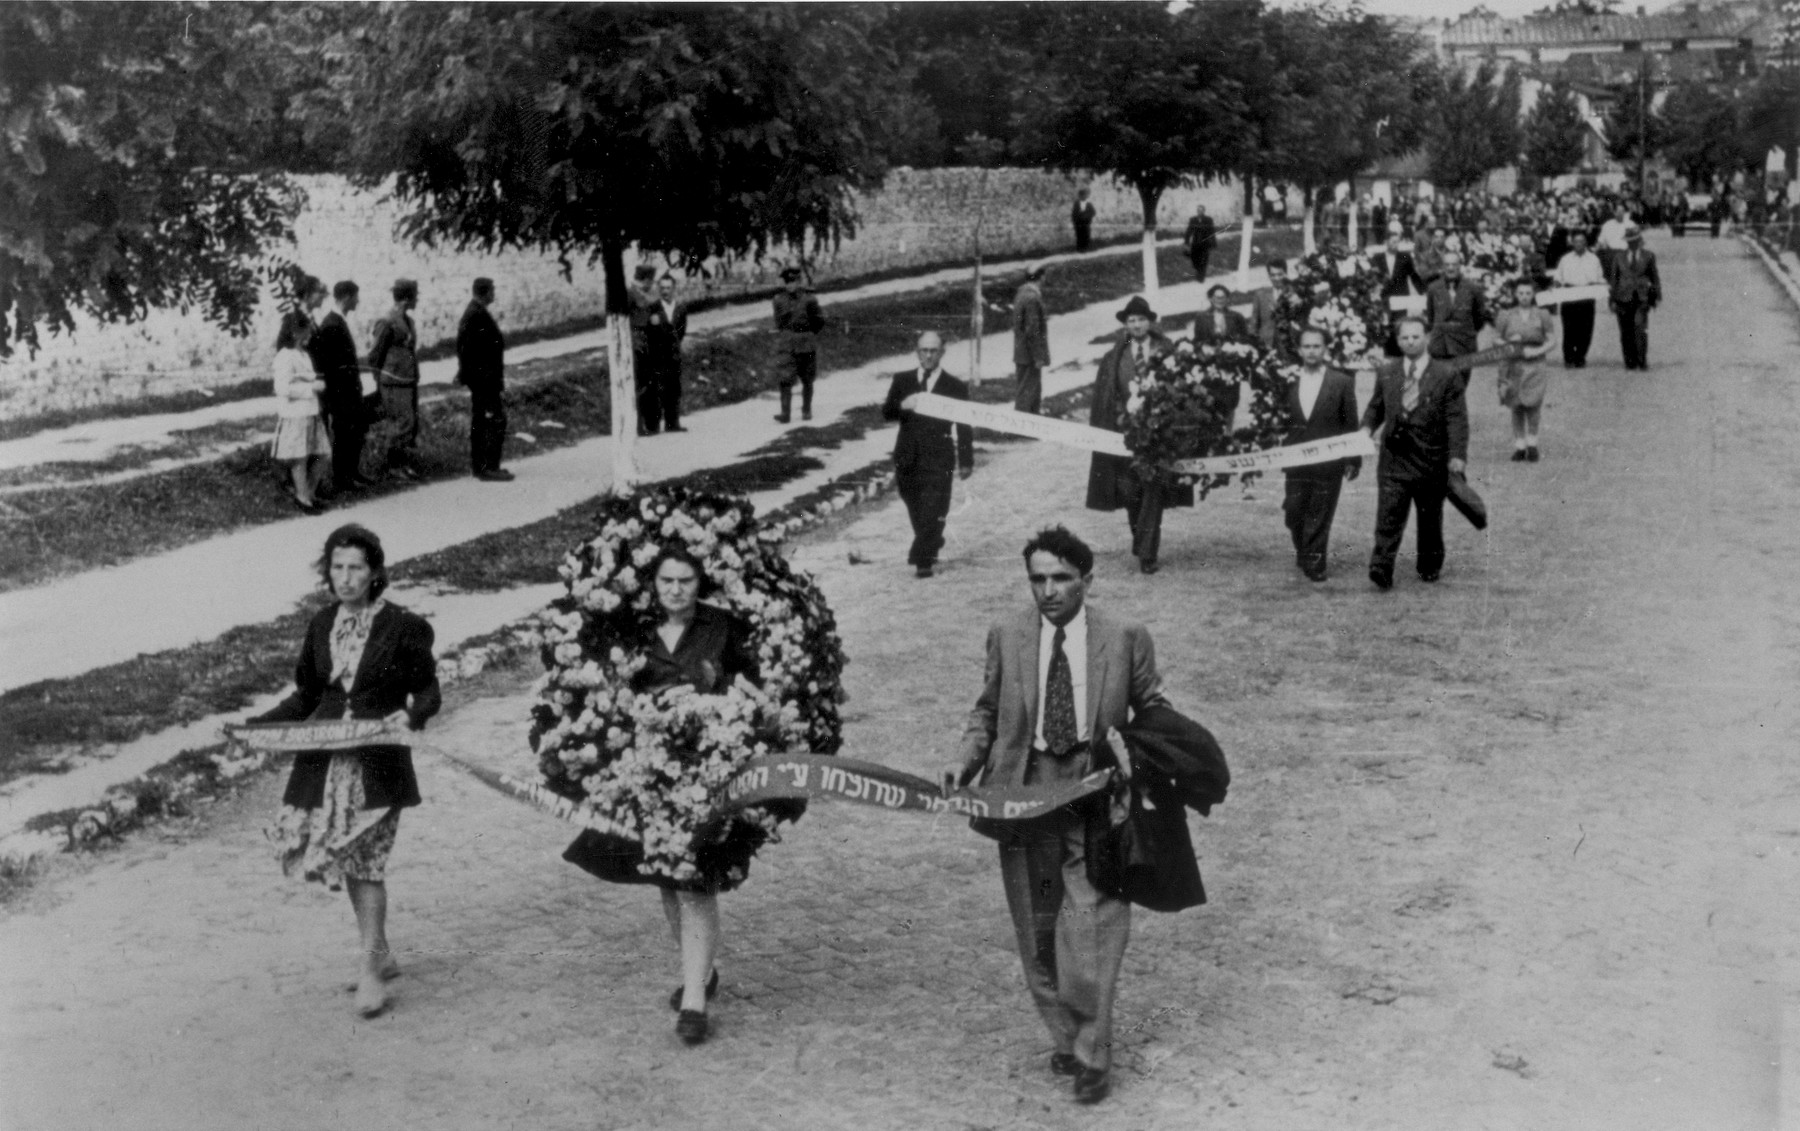 Funeral procession for the victims of the Kielce pogrom.